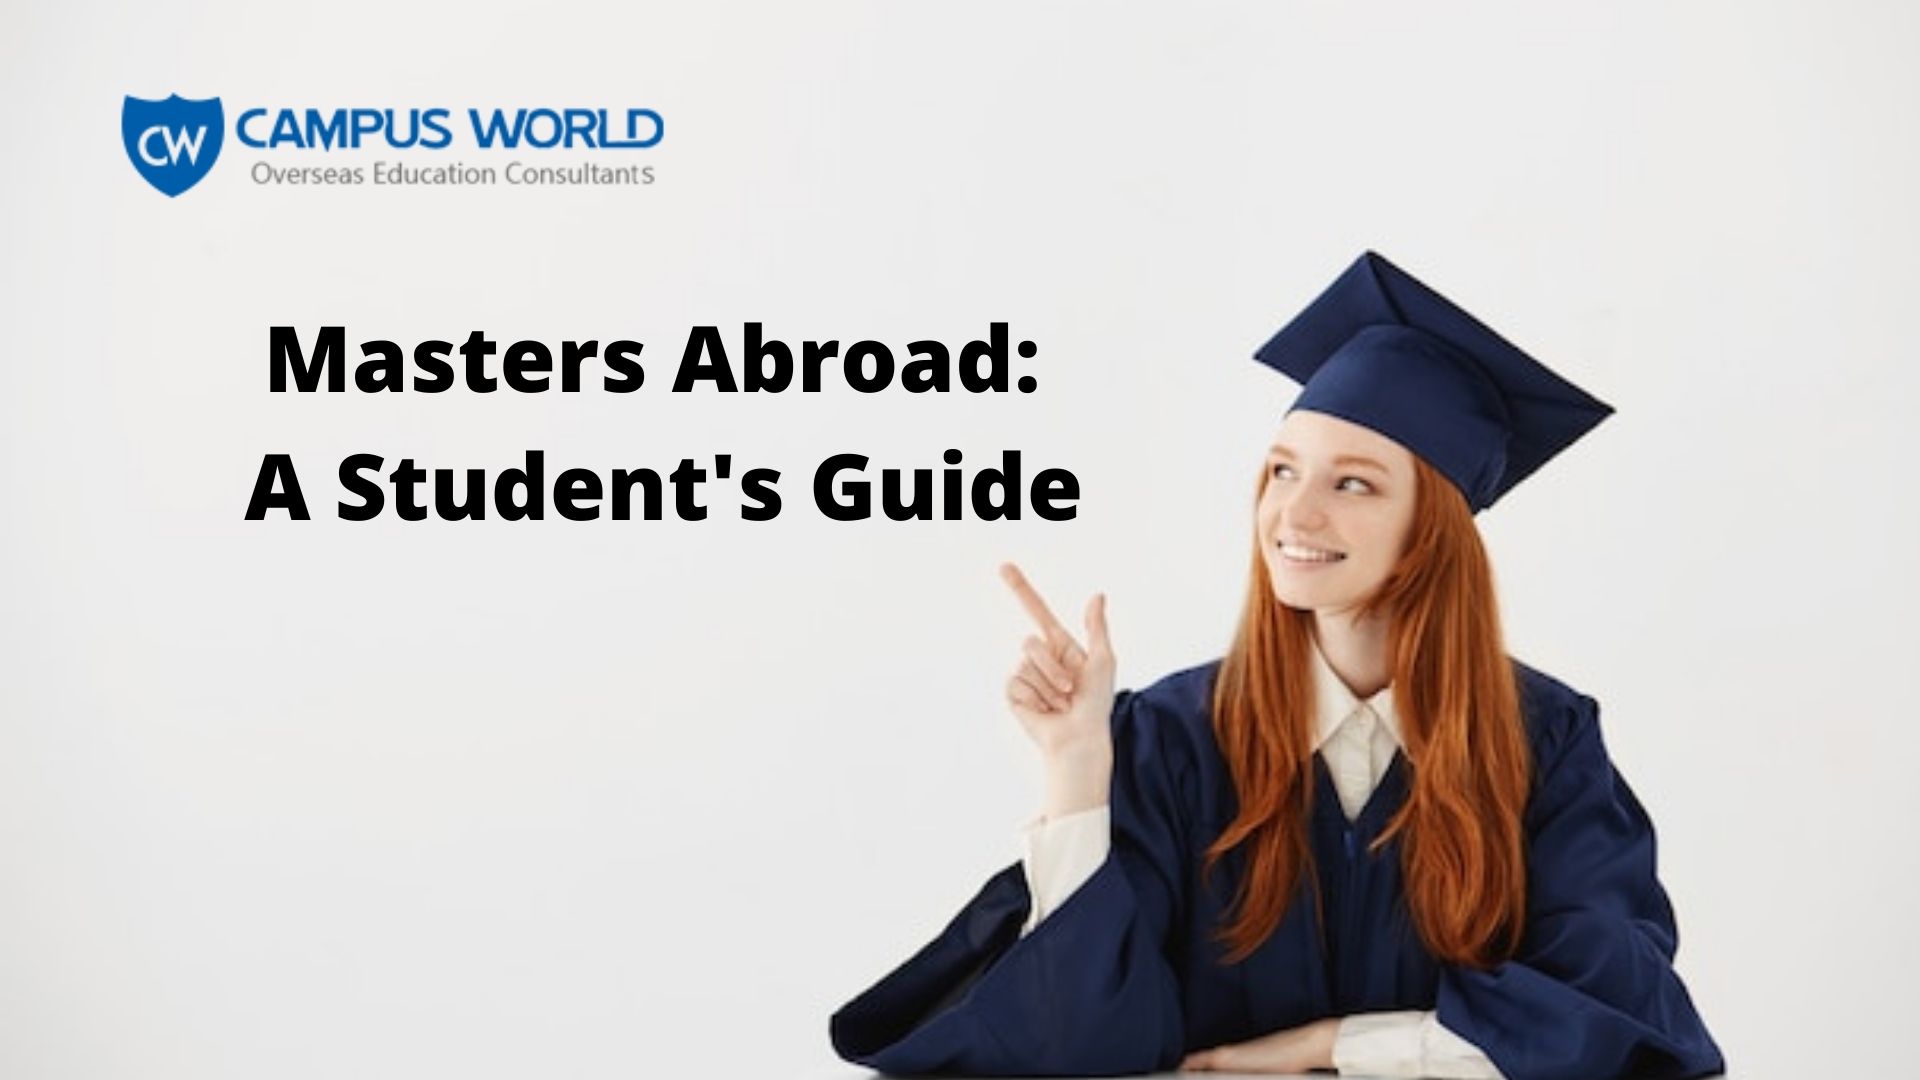 Masters Abroad: A Student's Guide